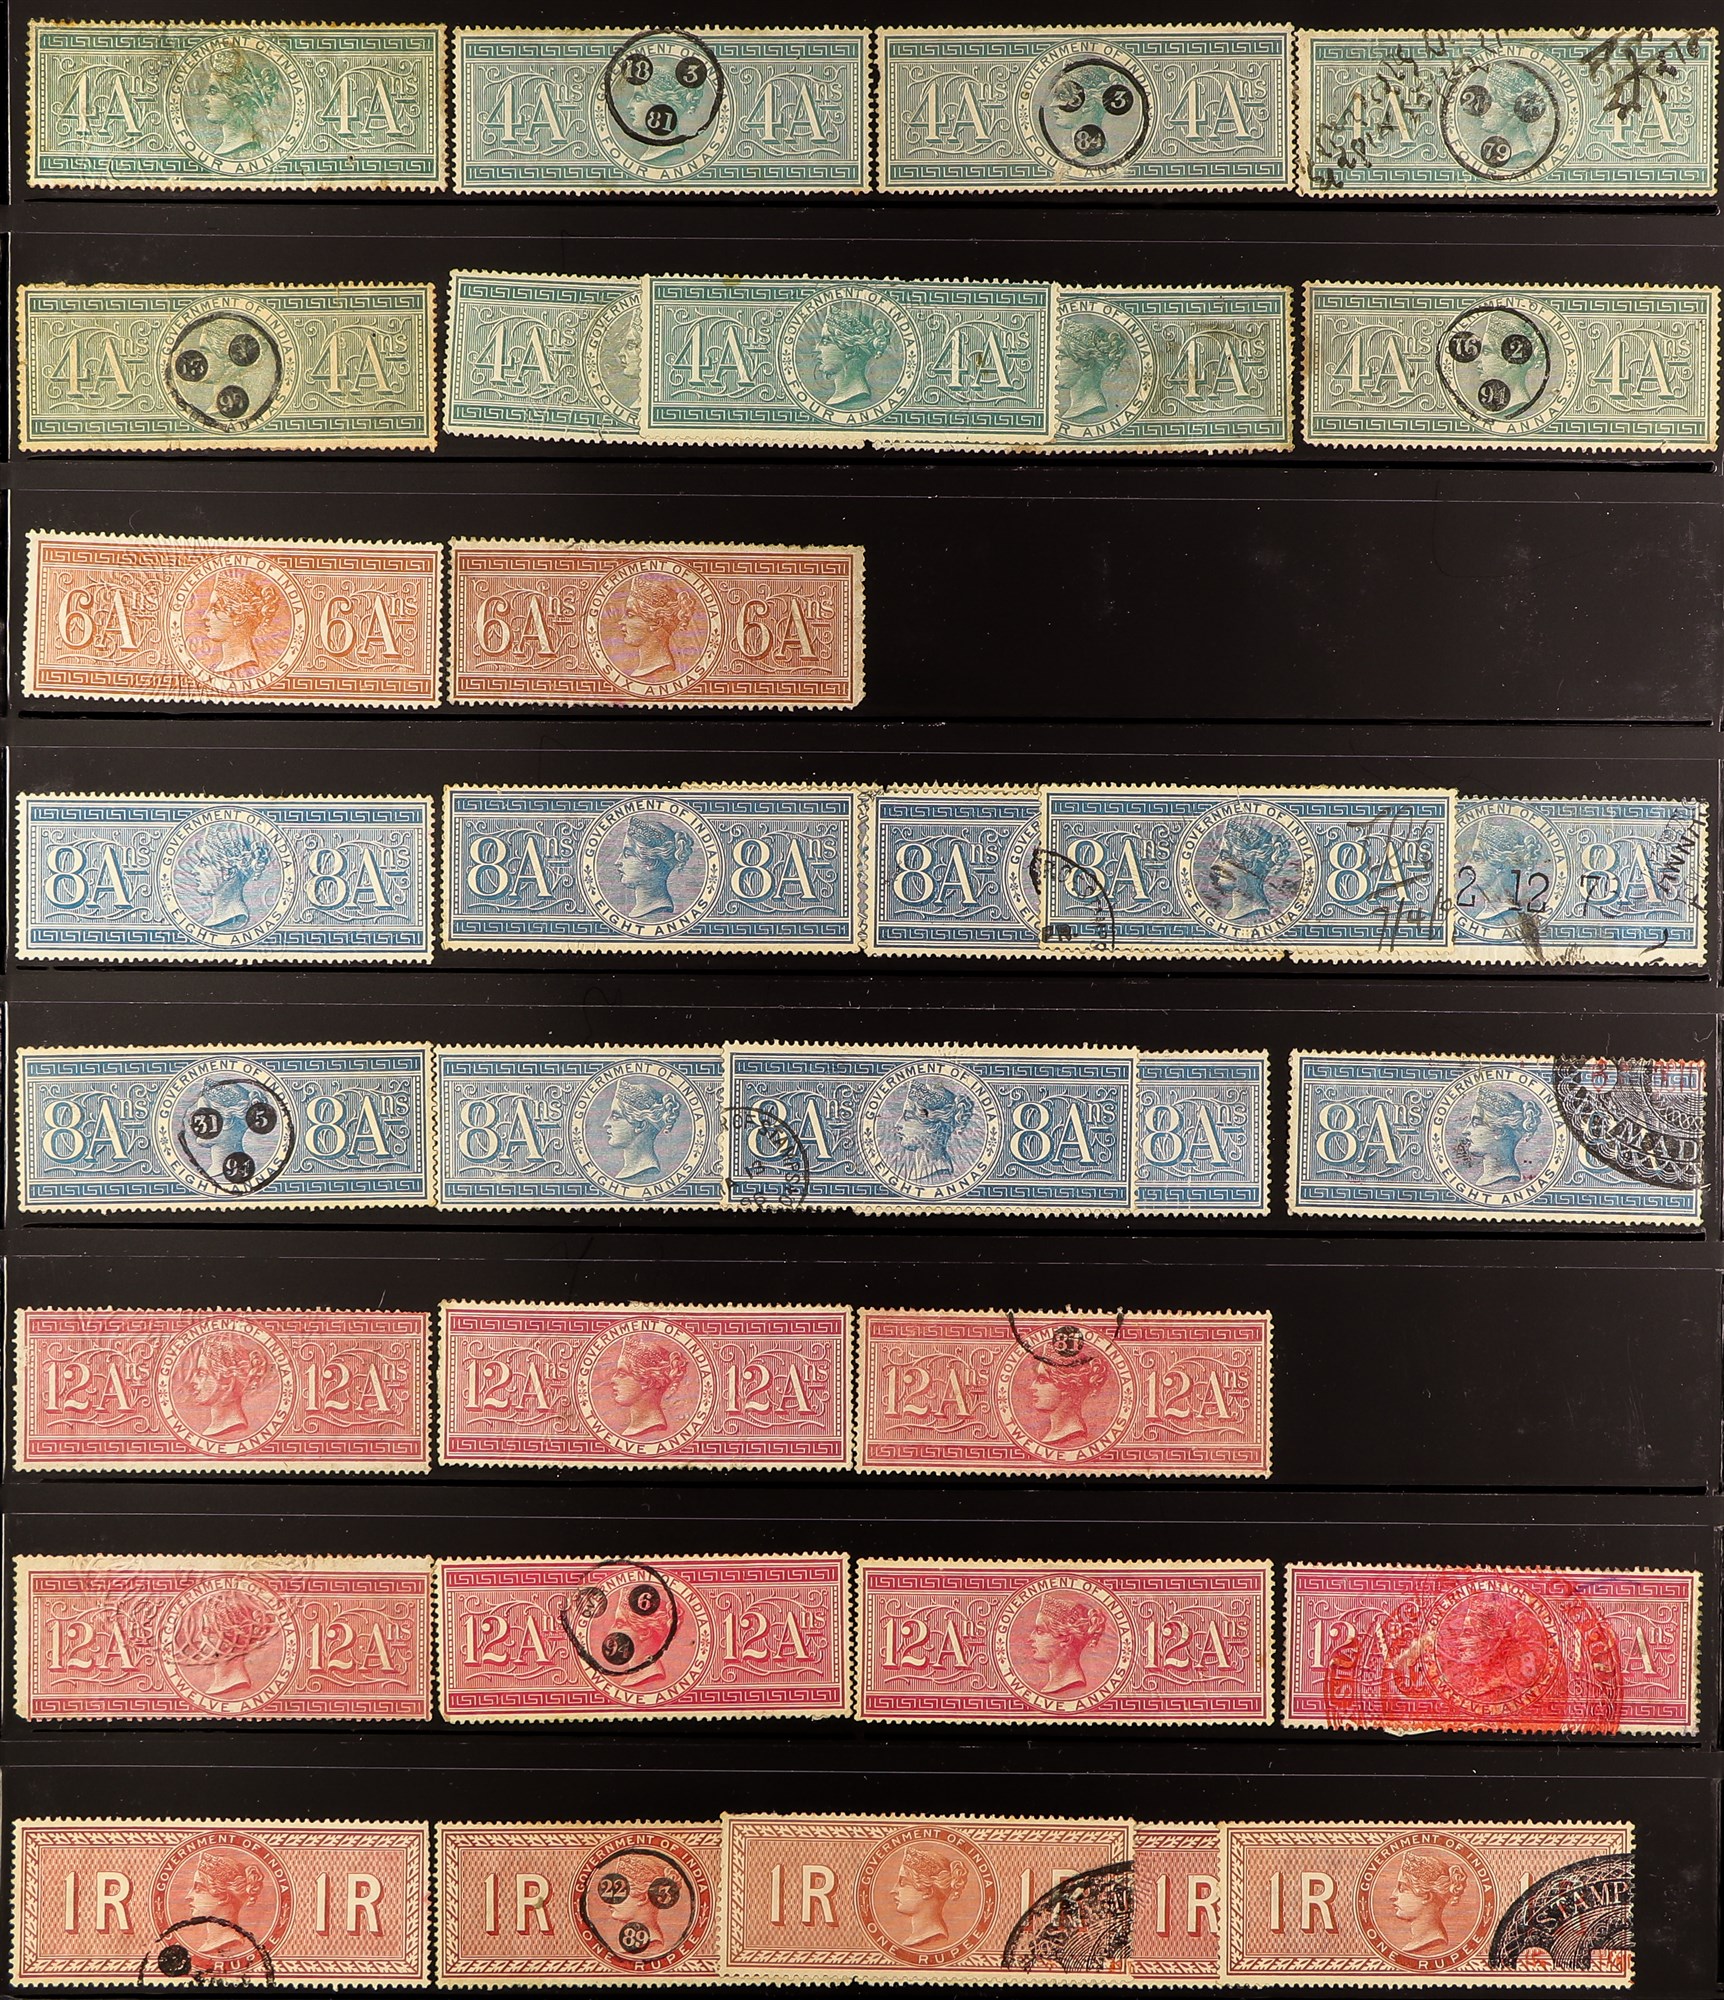 INDIA REVENUE STAMPS 1866 - 1975 collection of over 330 Special Adhesives on protective pages, - Image 2 of 8